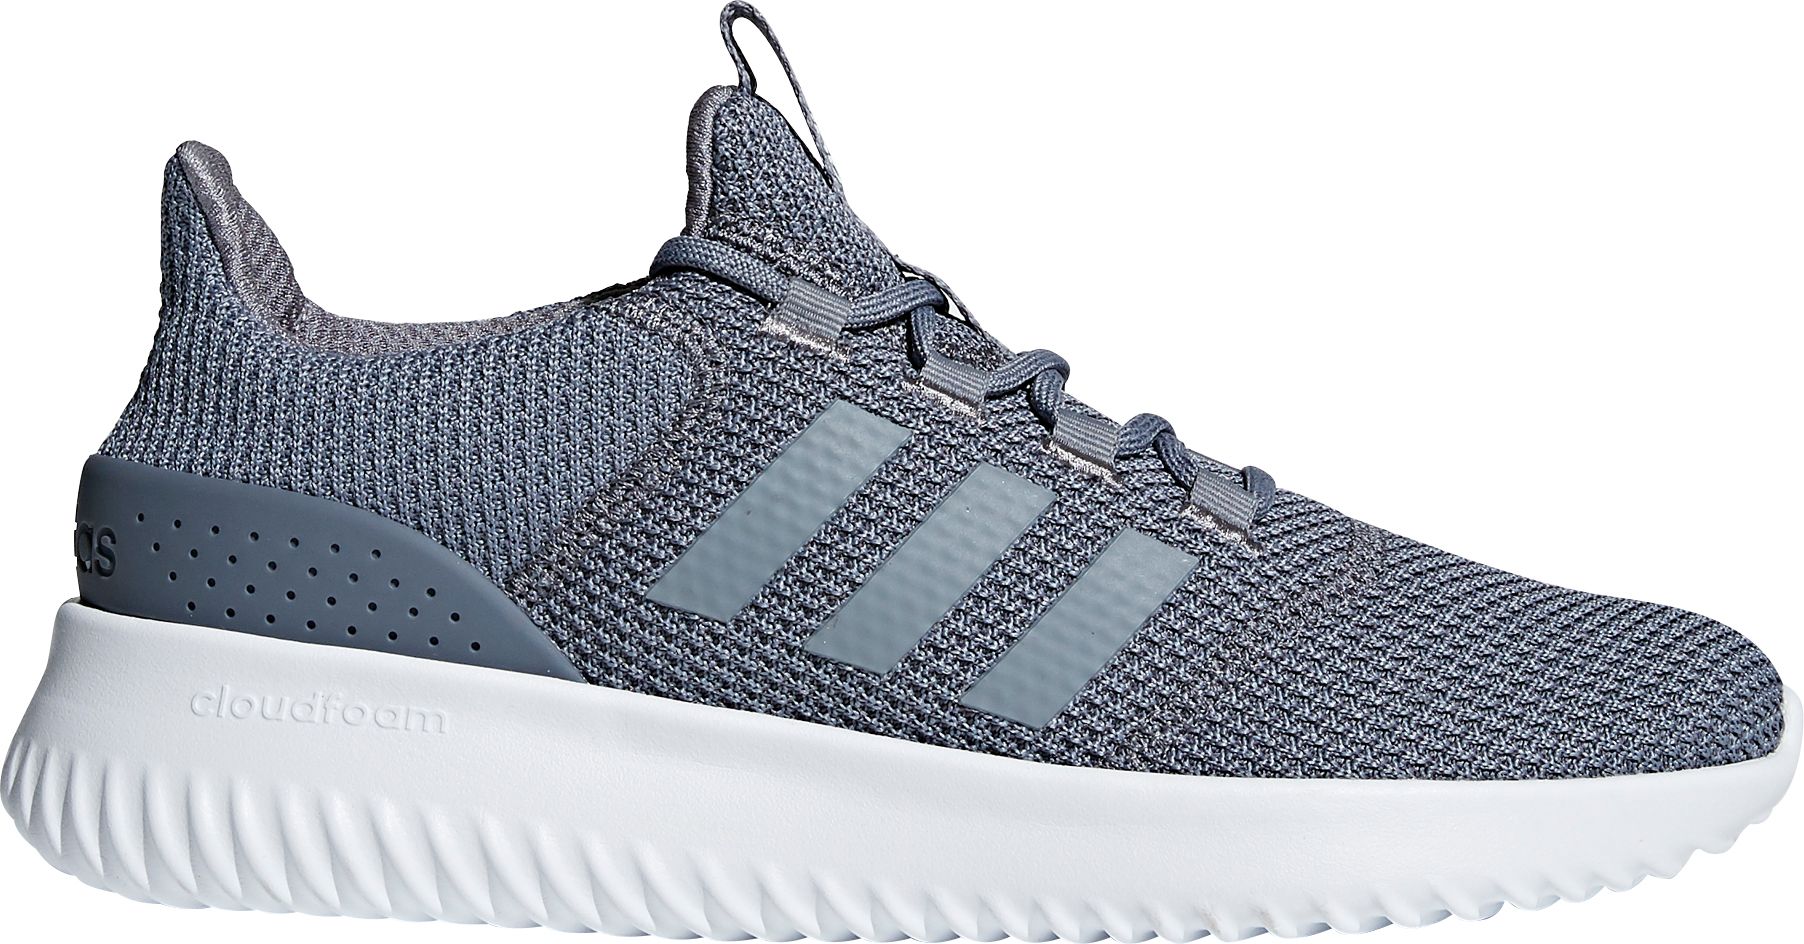 are adidas cloudfoam good for walking